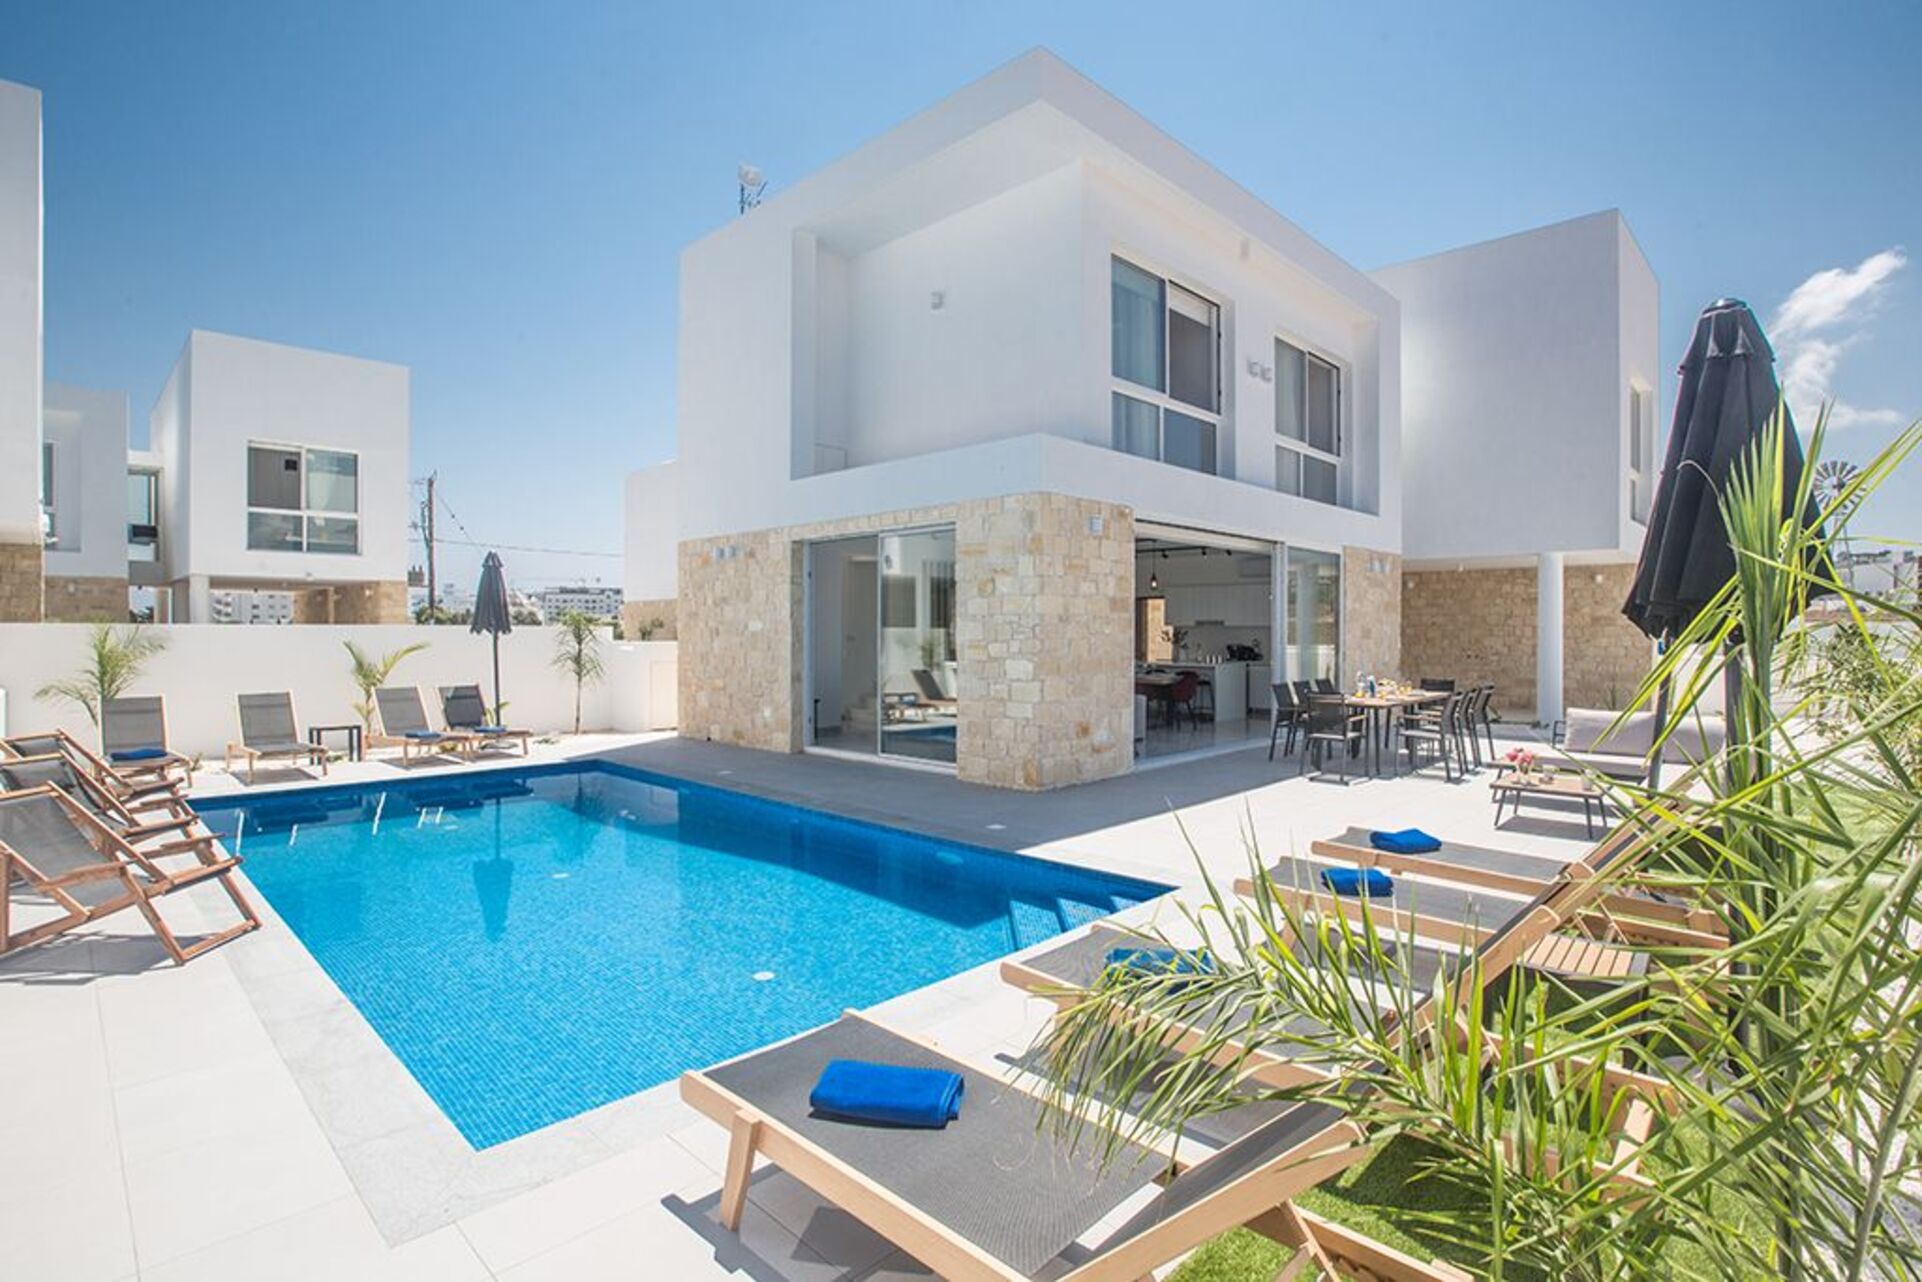 Property Image 2 - The Ultimate Property Manager Holiday Villa in Protaras with Private Pool and Close to the Beach, Protaras